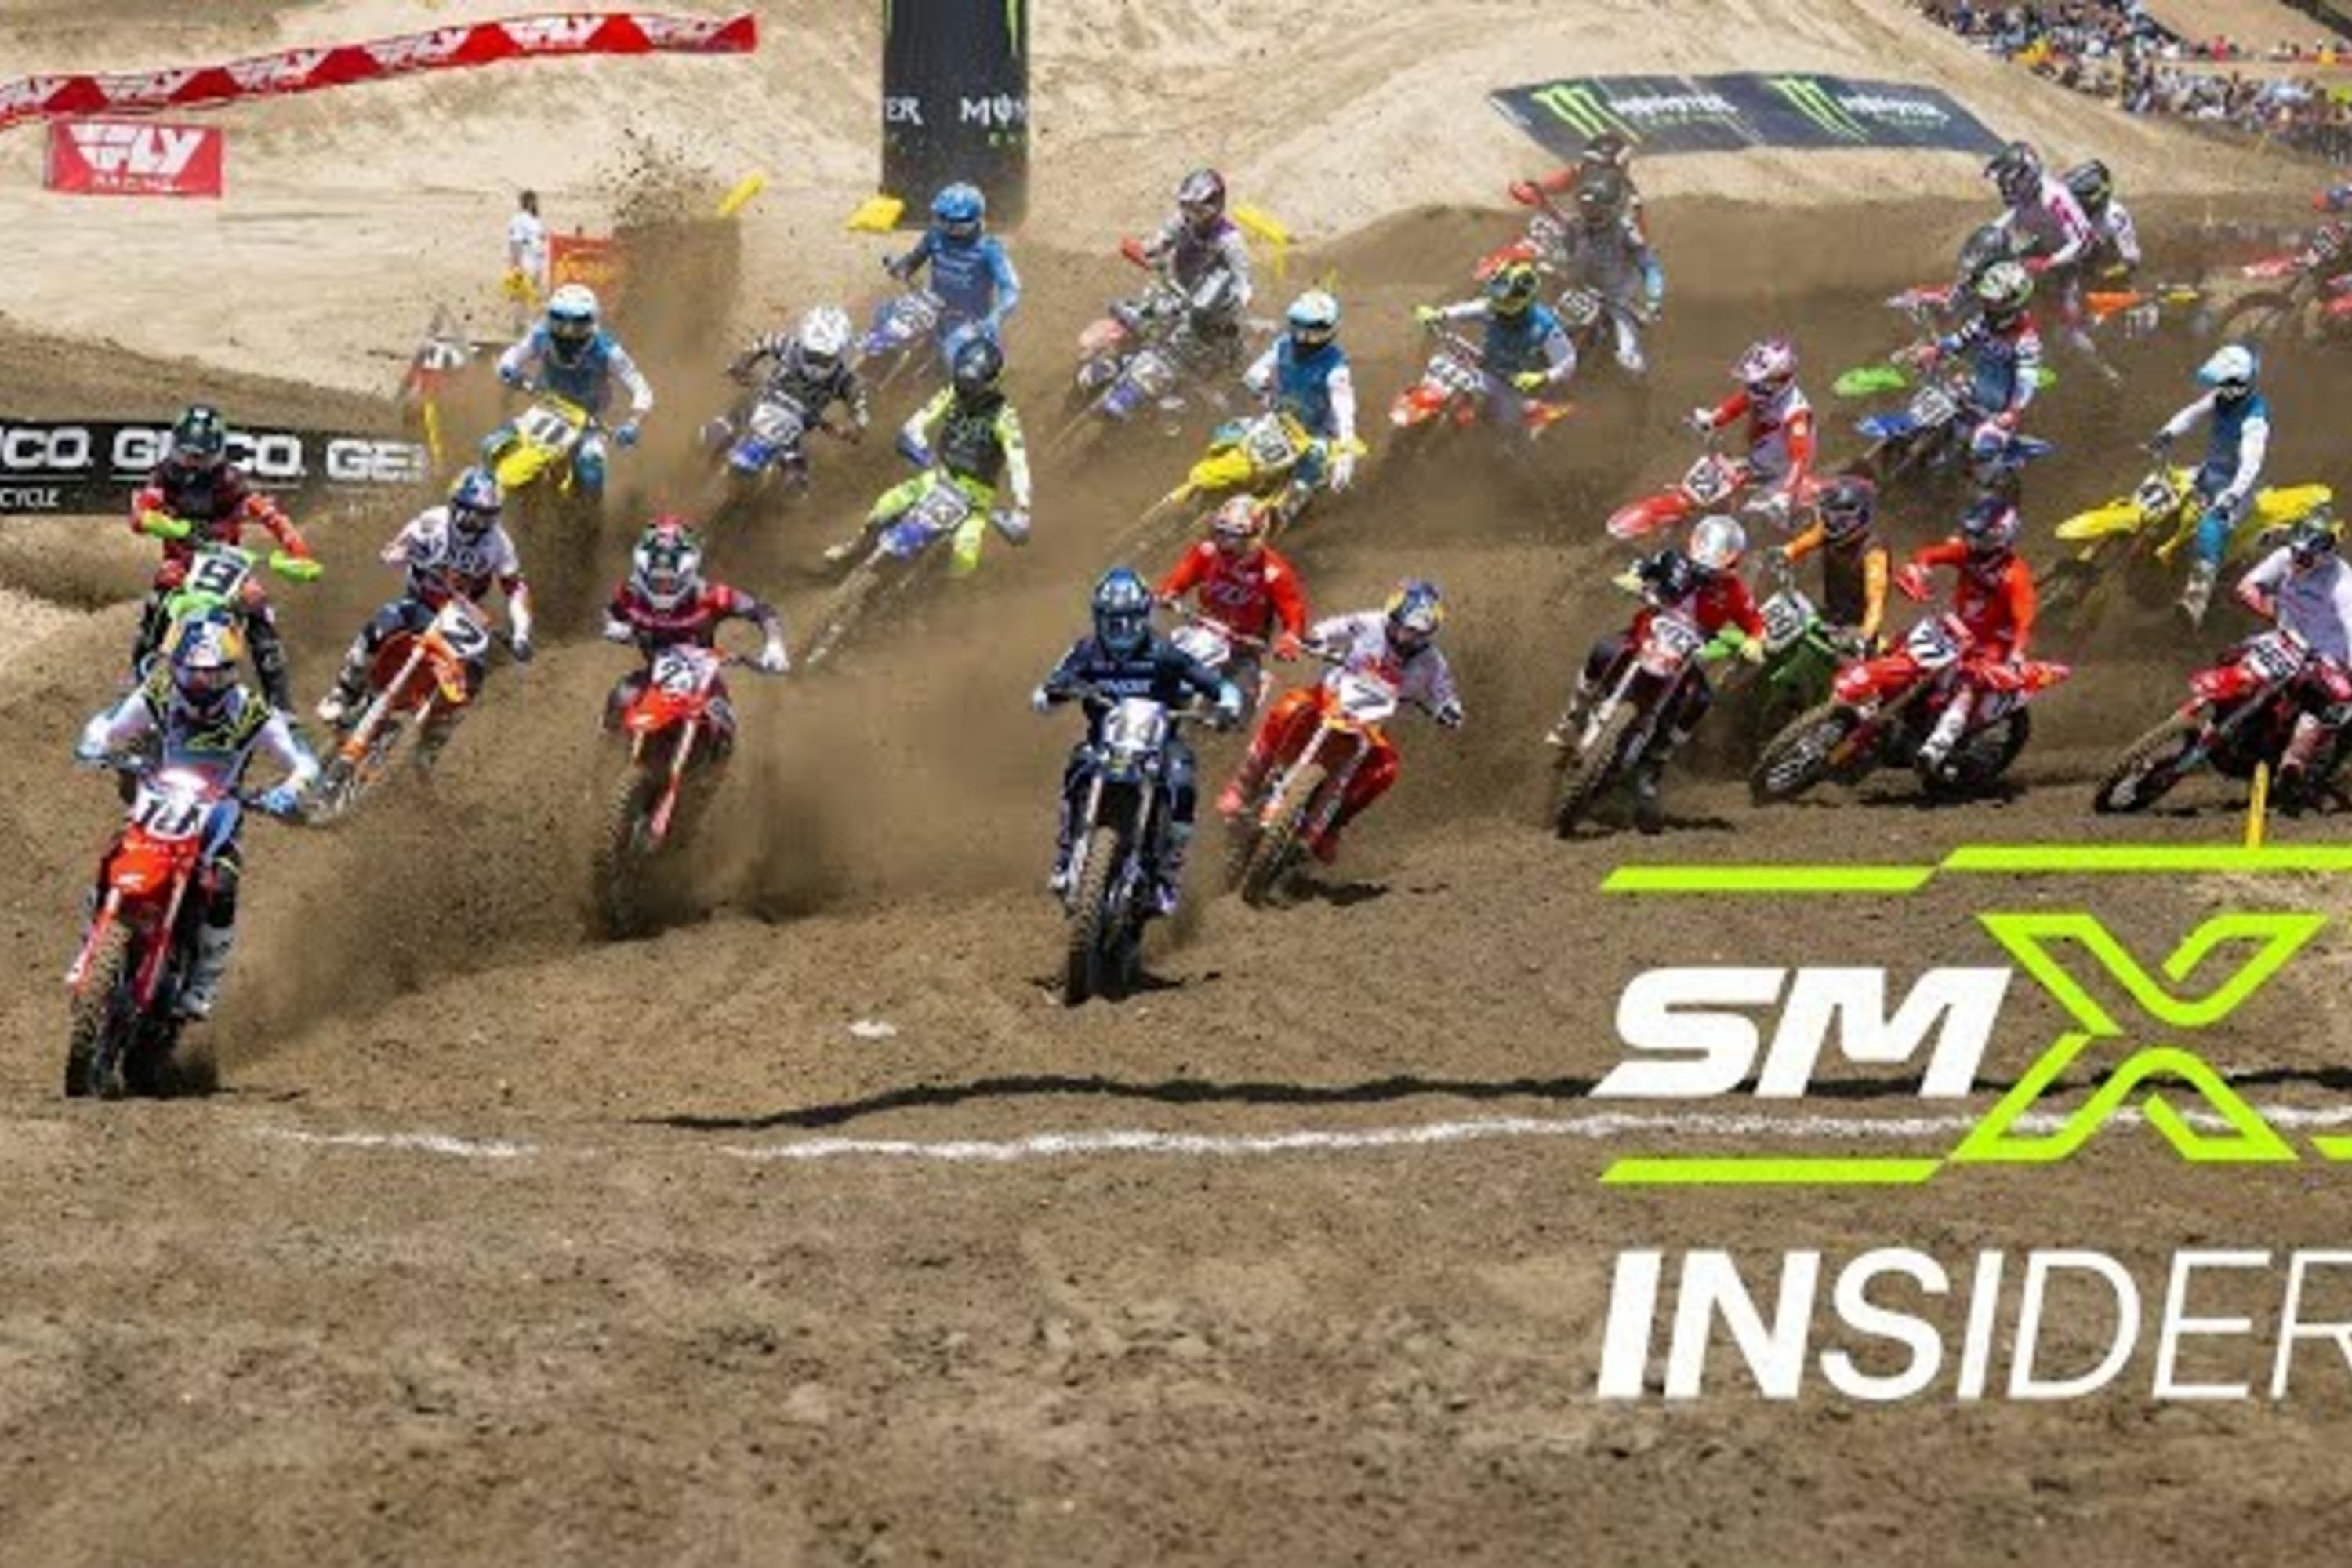 Watch SMX Insider - Episode 25 SuperMotocross Continues with Pro Motocross Season